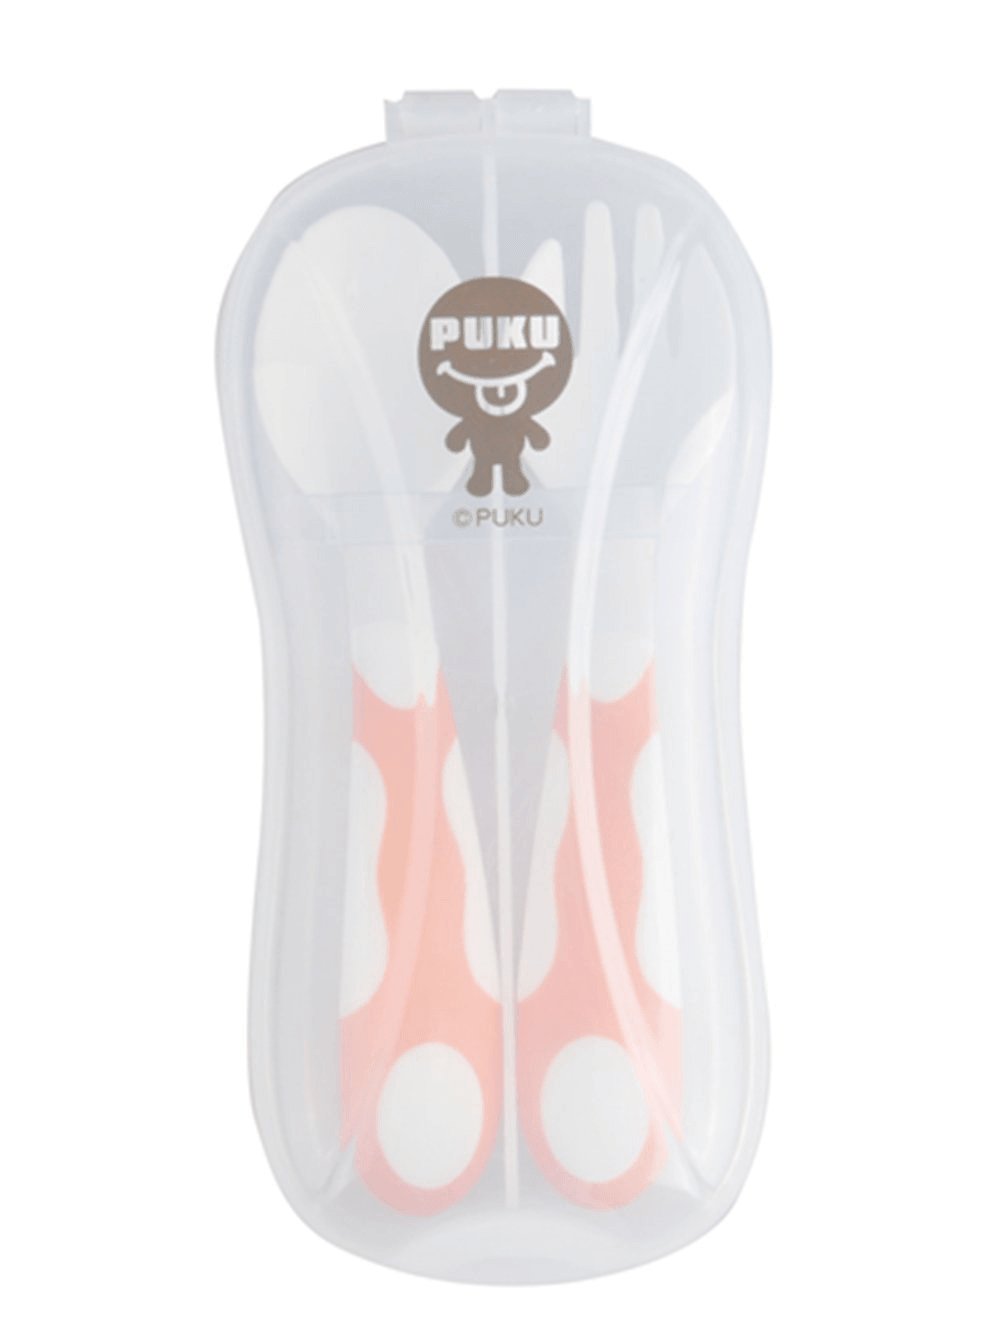 PUKU Kids Fork and Spoon Set with Carrying Case Child Pack Utensils Baby Tableware BPA- Free - Trendha